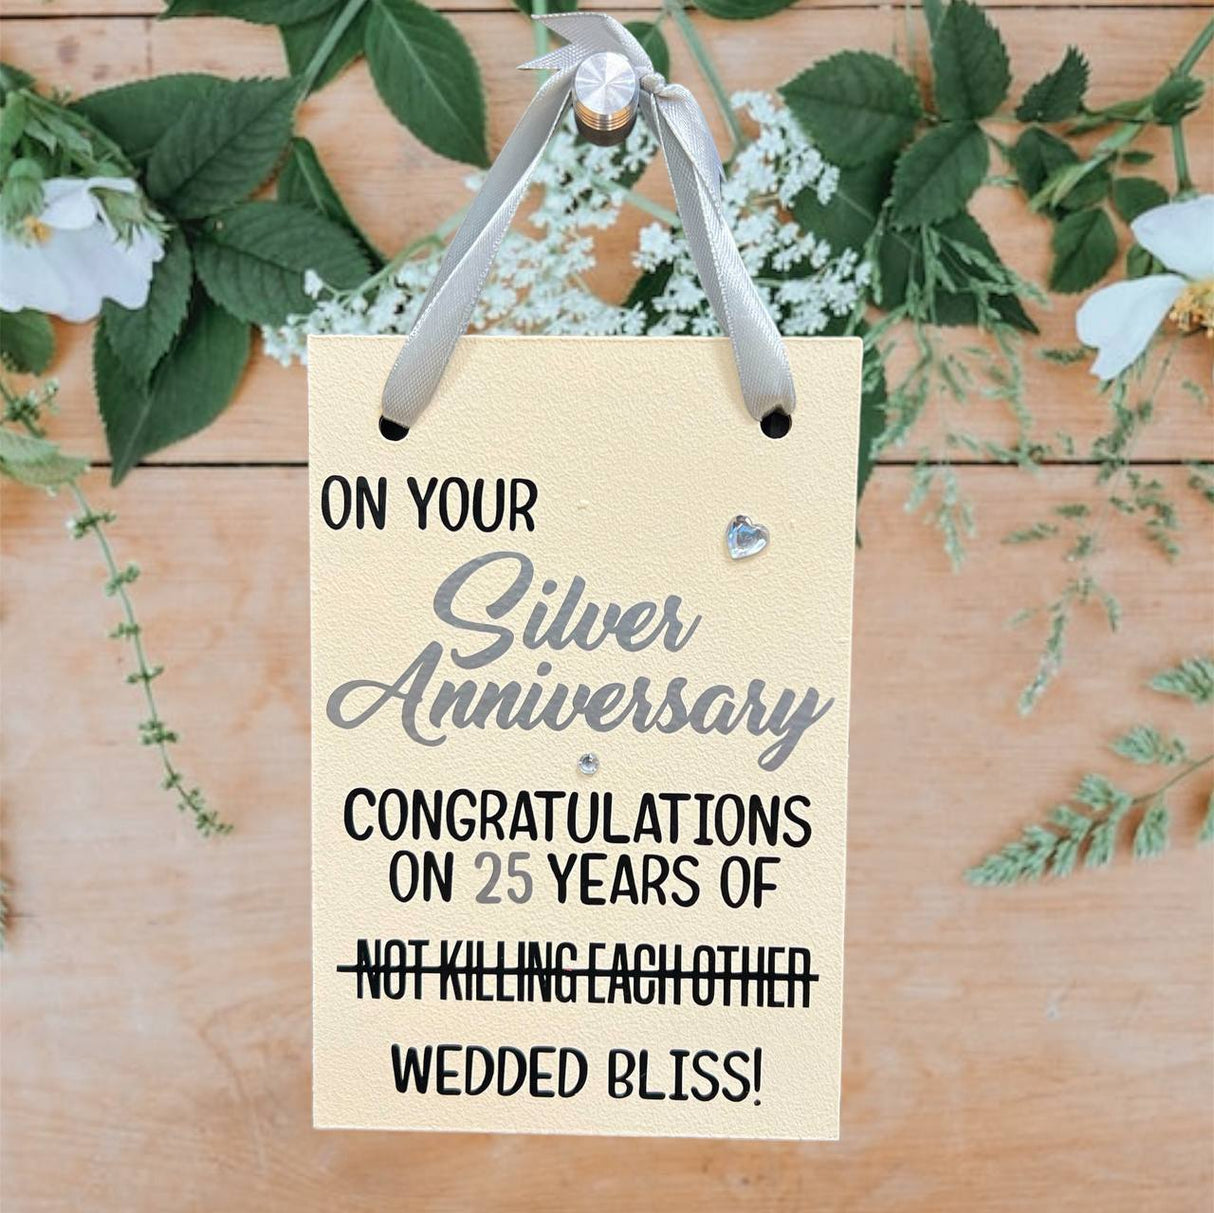 Silver Anniversary - Wedded Bliss!